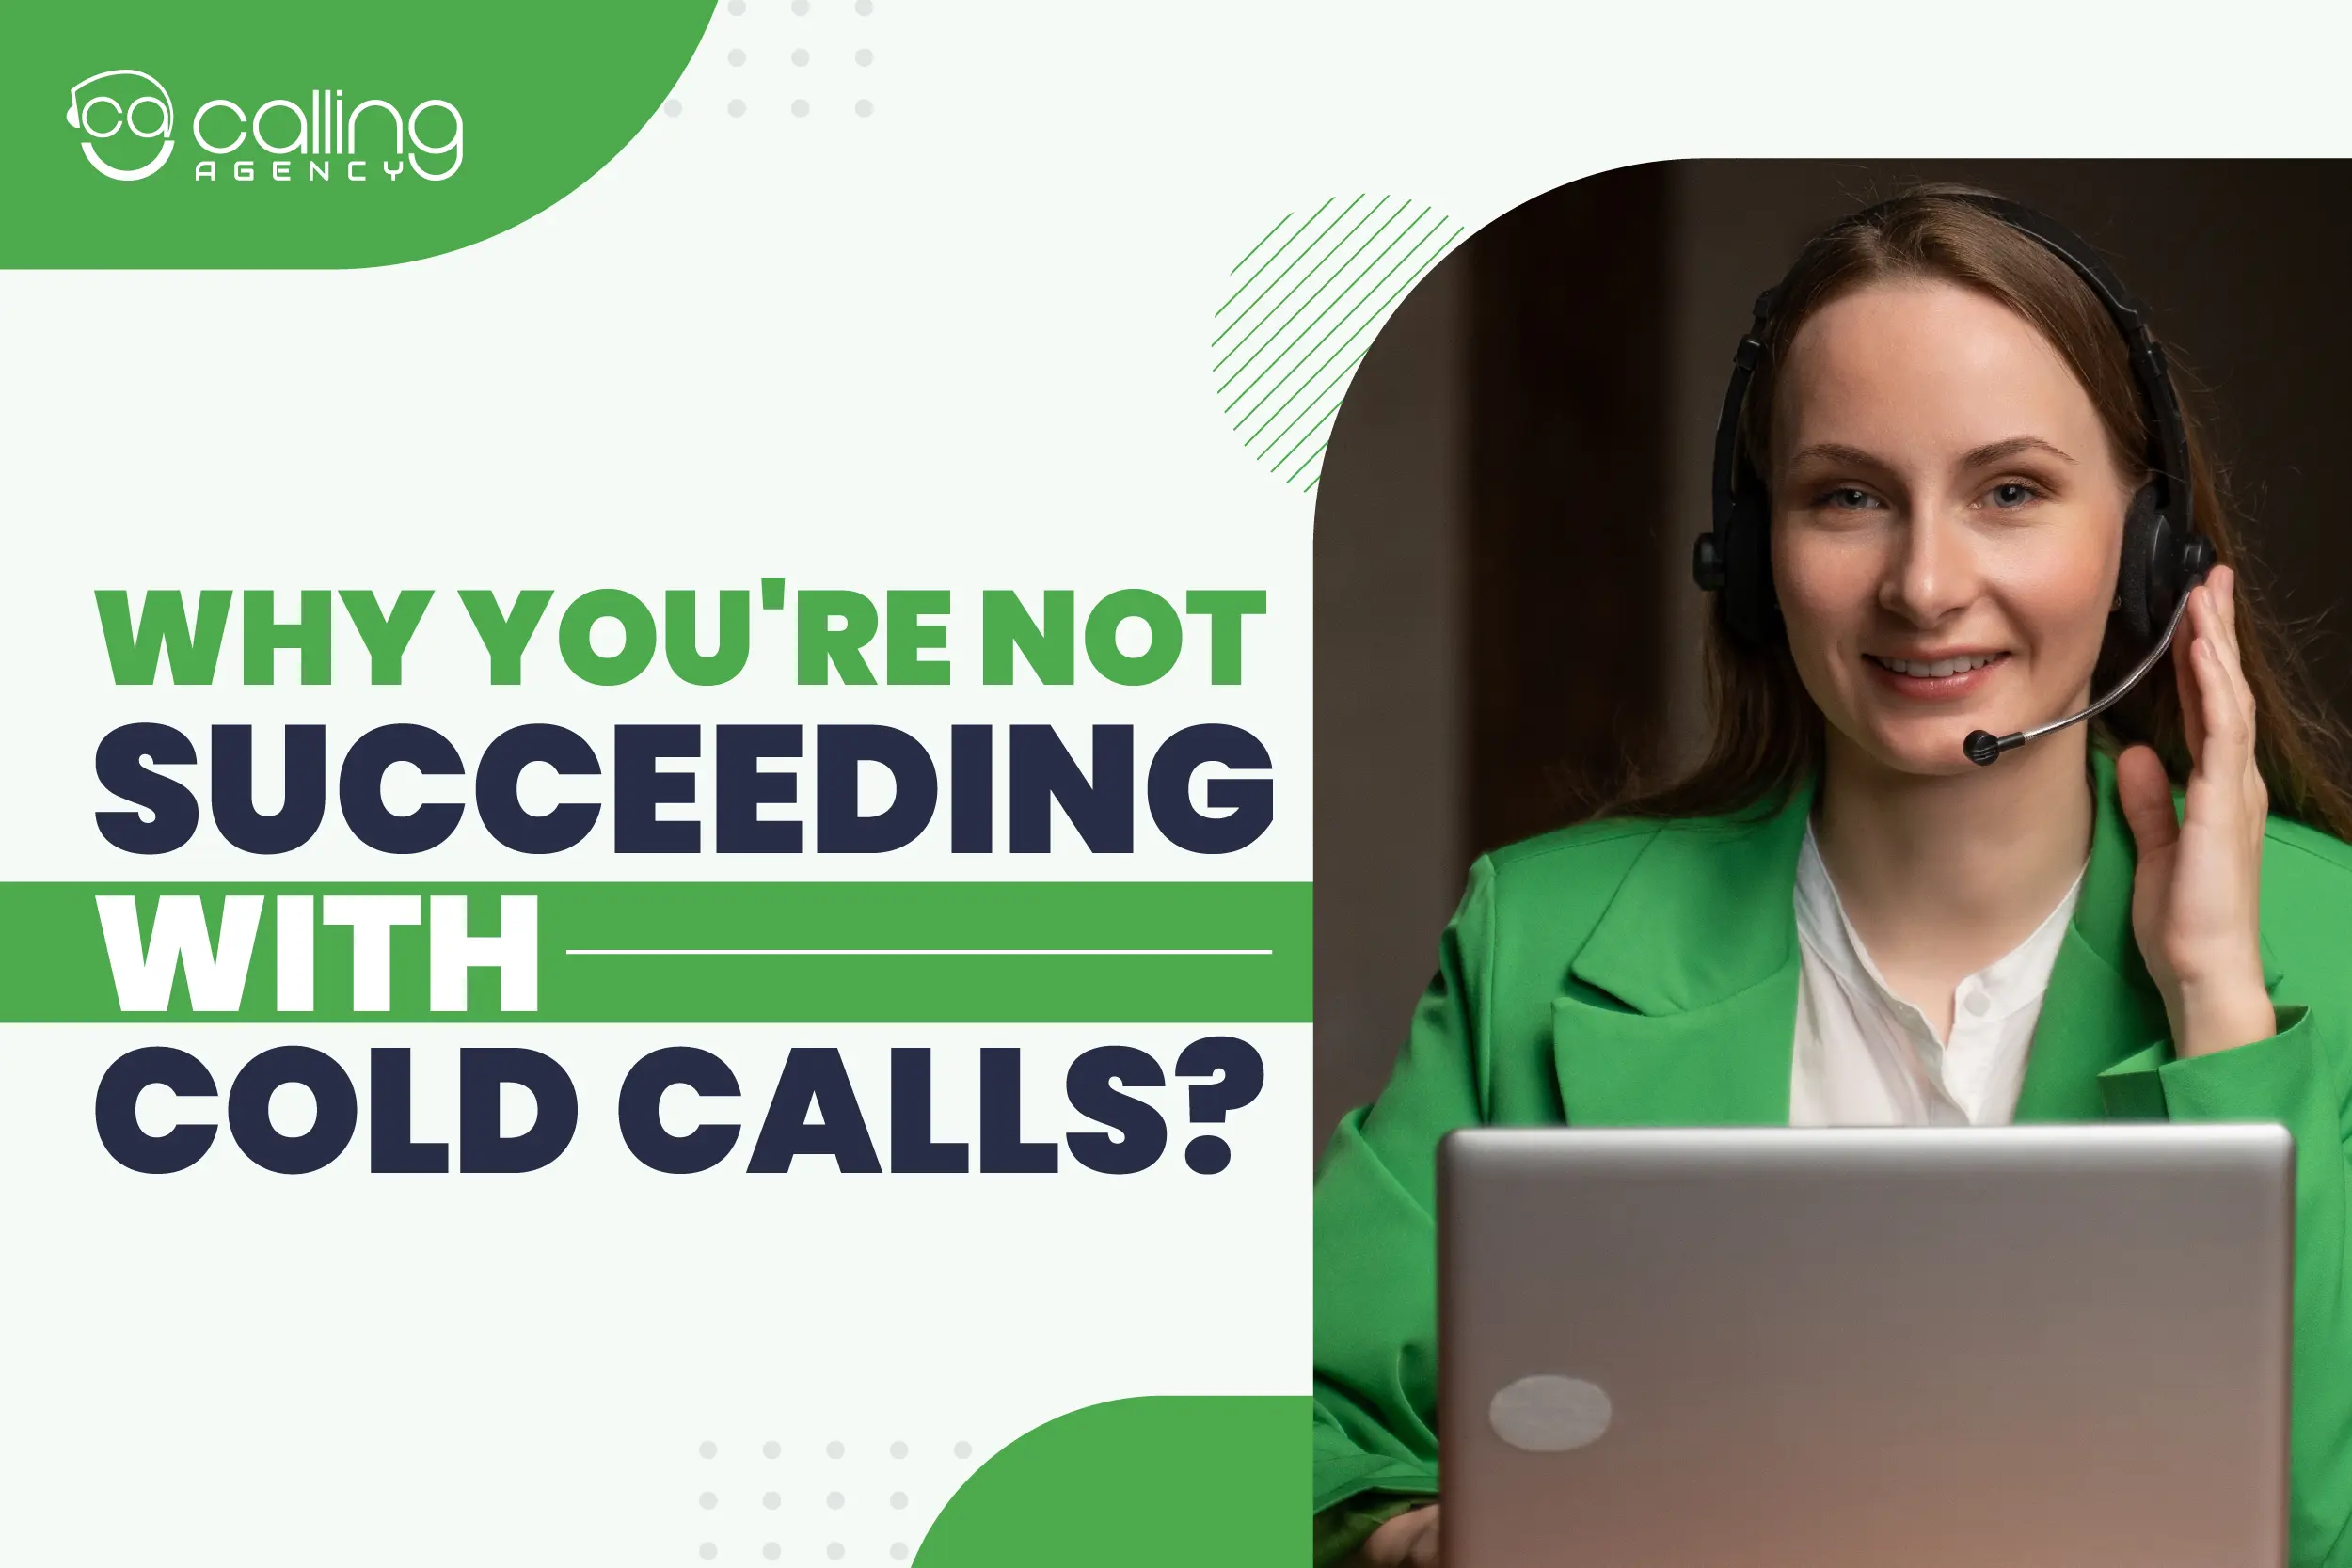 8 Reasons Why You’re Not Succeeding With Cold Calls?